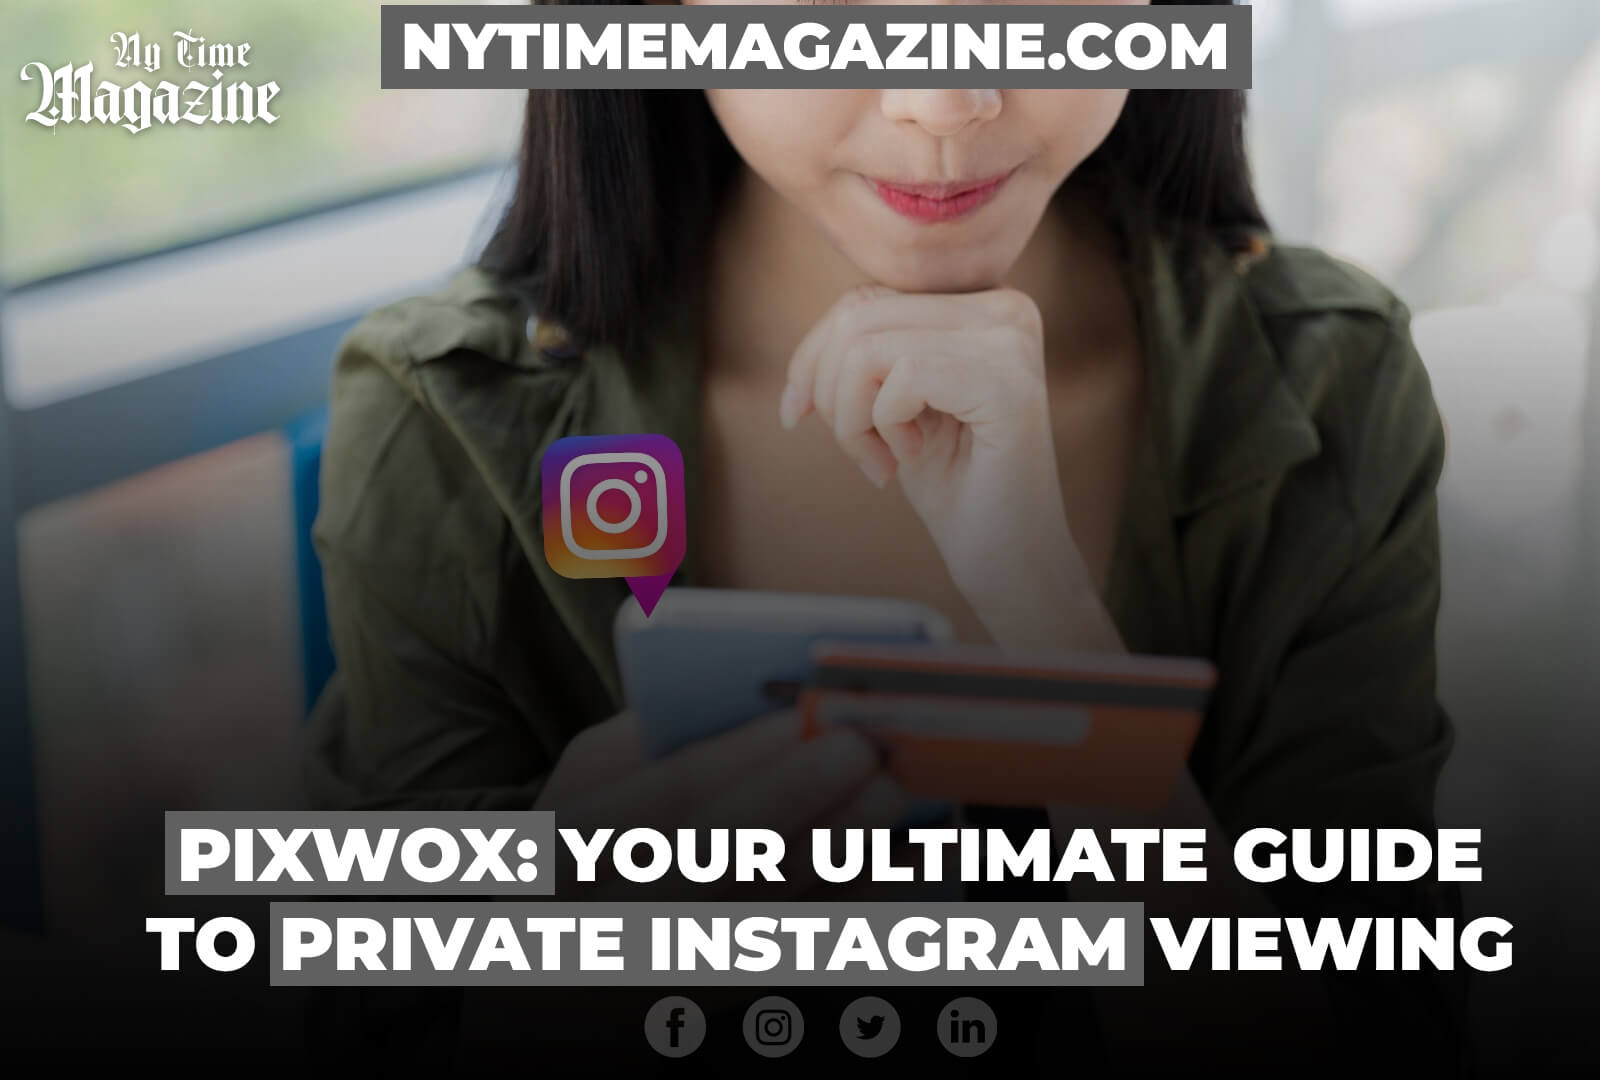 Pixwox.com: YOUR ULTIMATE GUIDE TO PRIVATE INSTAGRAM VIEWING